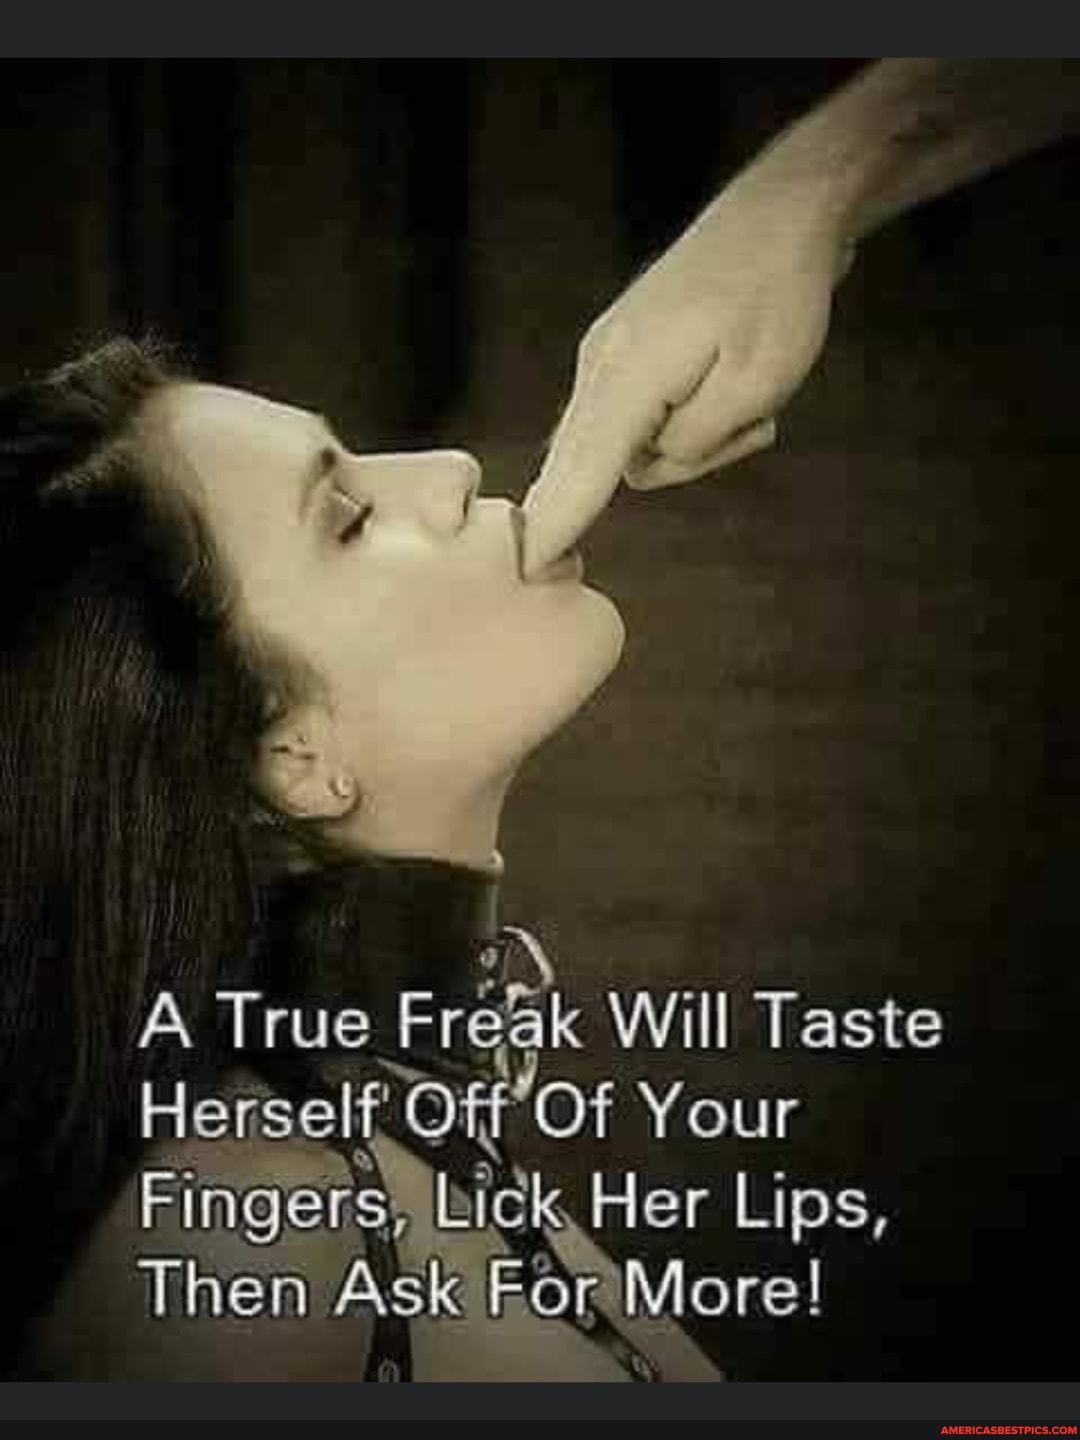 Lick her more